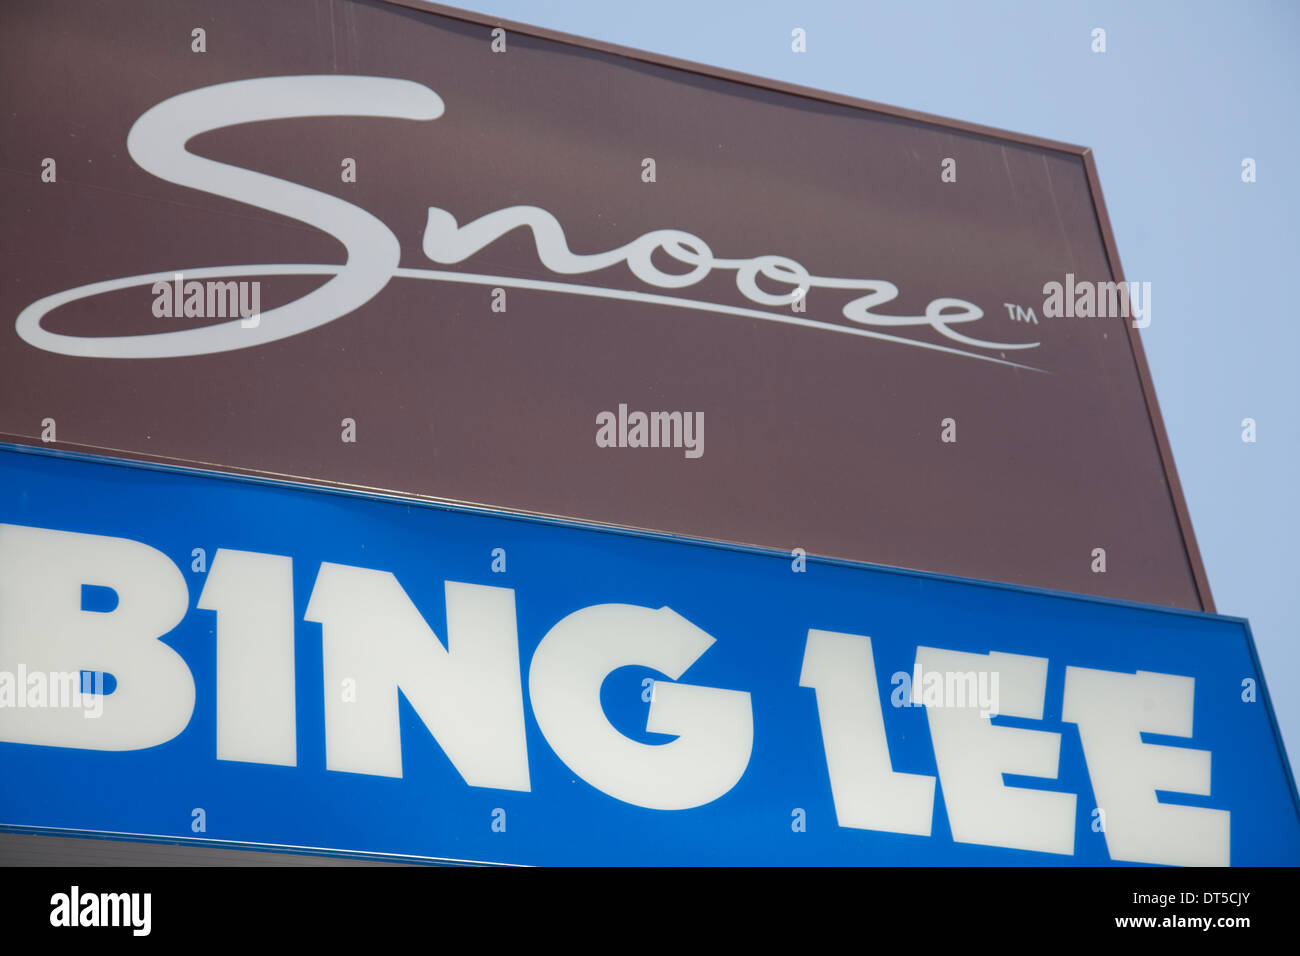 australain retailers Bing Lee and Snooze in north sydney, Bing Lee are suppliers of electrical and white goods, Snooze supply be Stock Photo